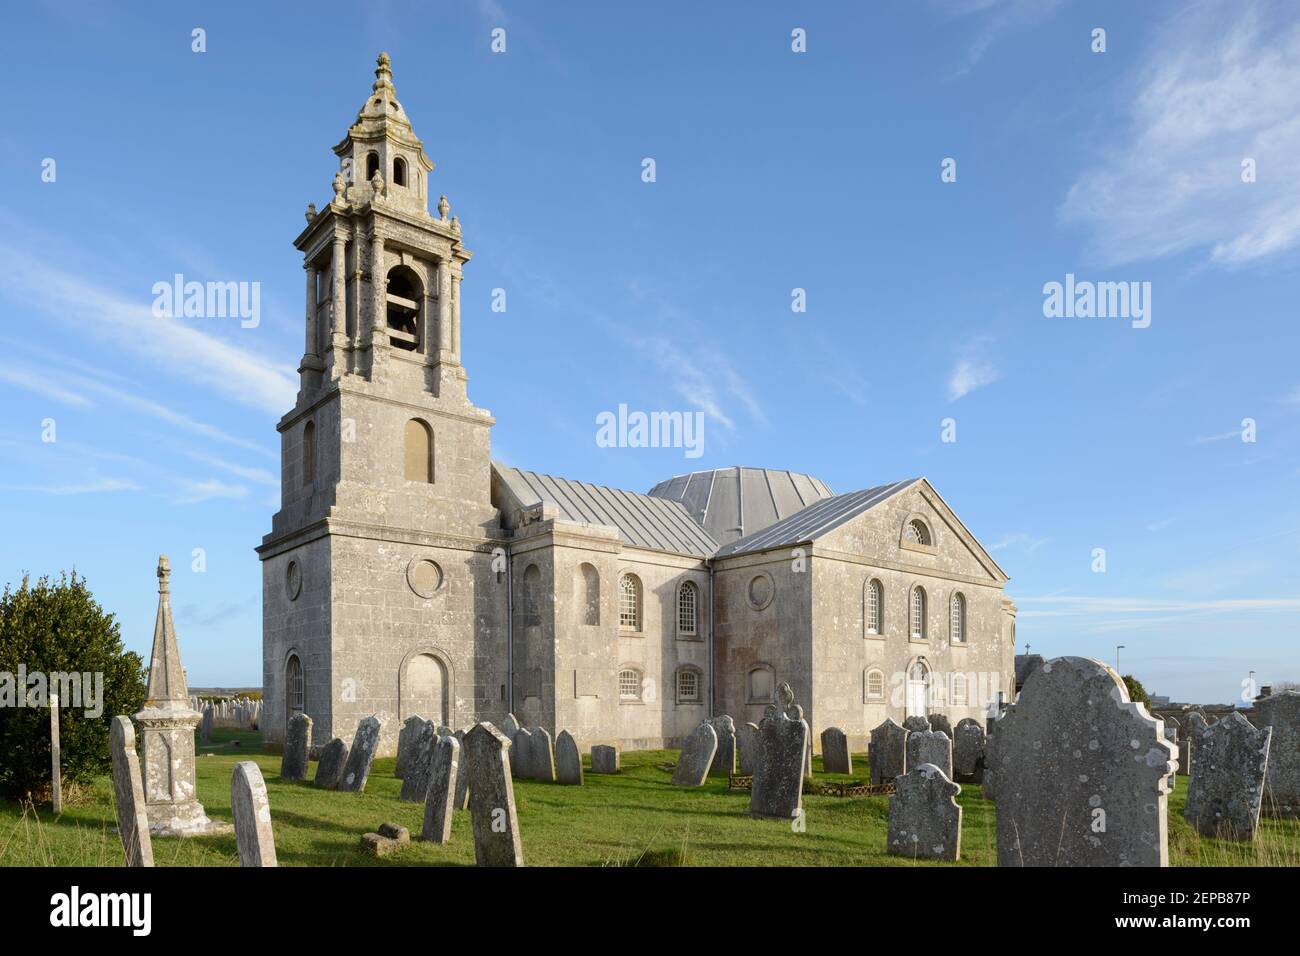 St George's, a historic church inspired by St Paul's Cathedral, Isle of Portland, Dorset. Stock Photo